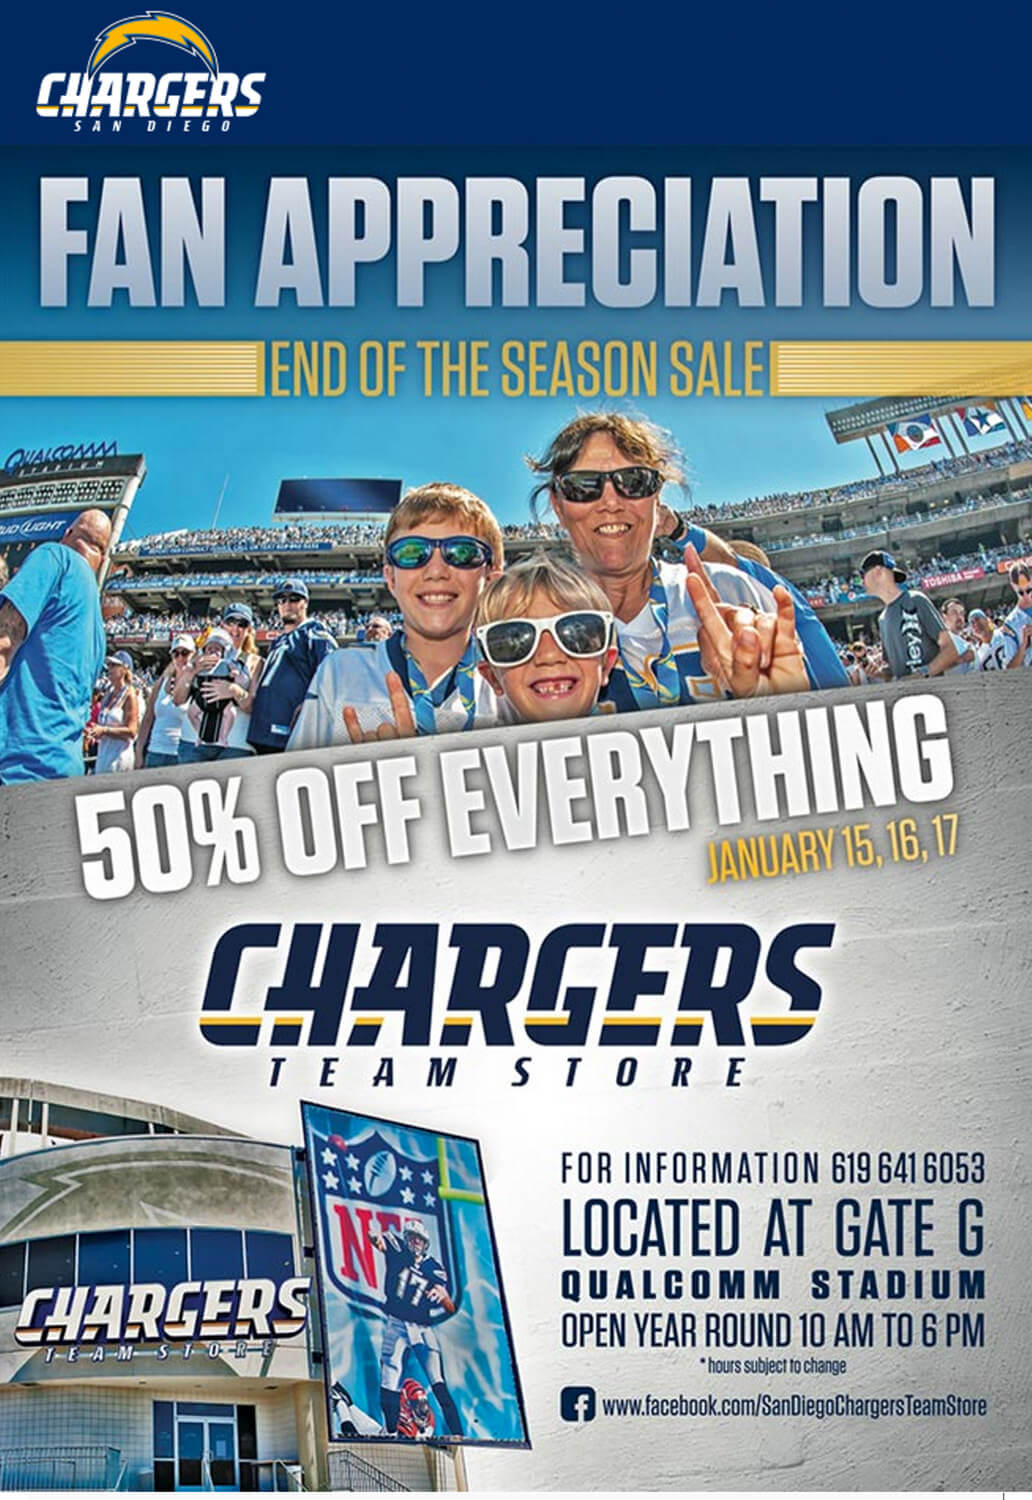 Media and Entertainment Email Marketing - San Diego Chargers